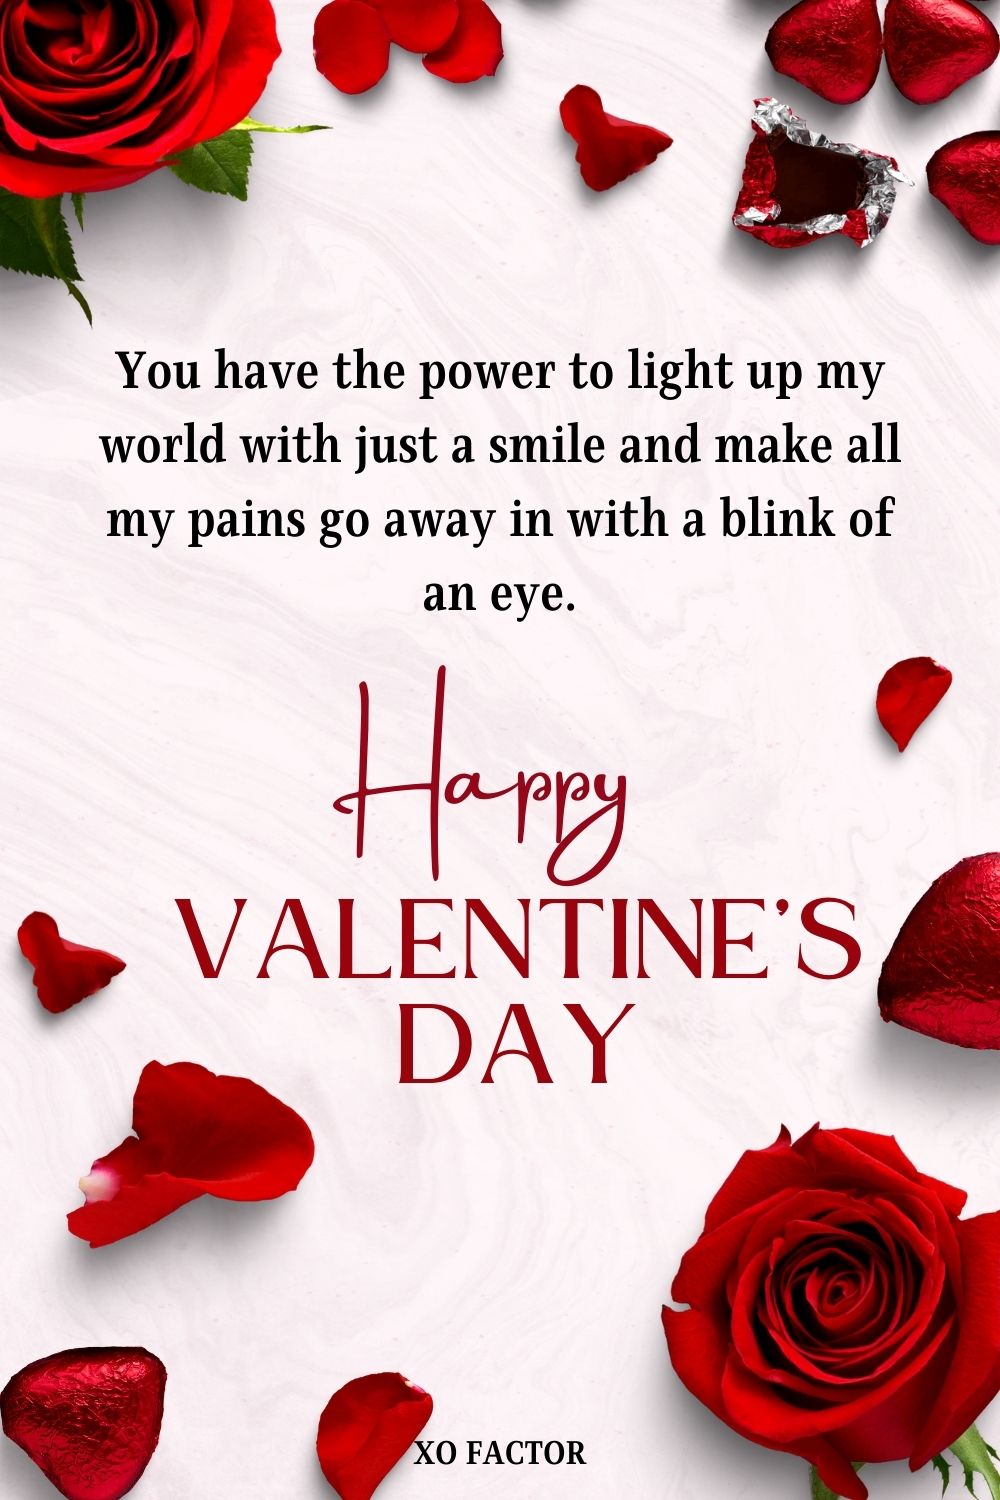 You have the power to light up my world with just a smile and make all my pains go away in with a blink of an eye. Happy Valentine’s Day!